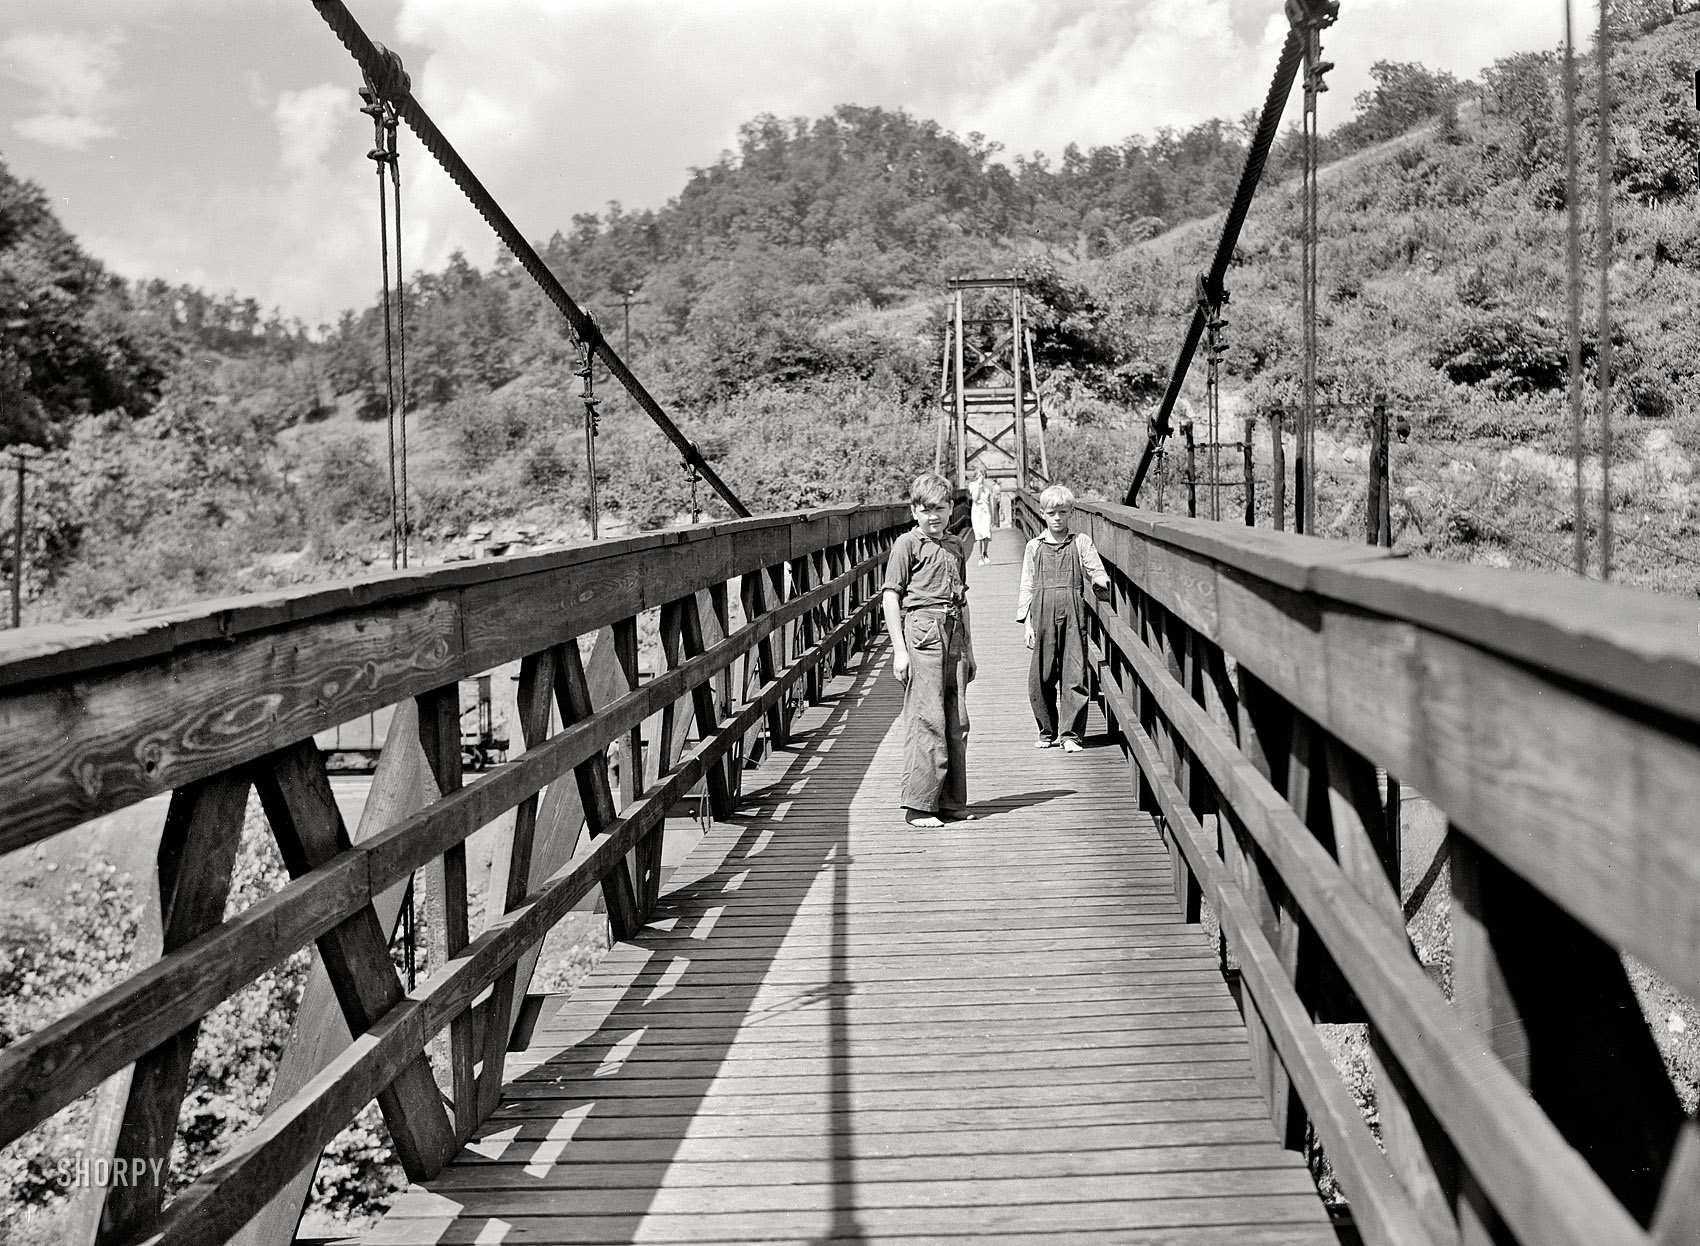 July 1940. Hazard, Kentucky. "Miners' children crossing swinging bridge from their homes into town." Photo by Marion Post Wolcott. View full size.